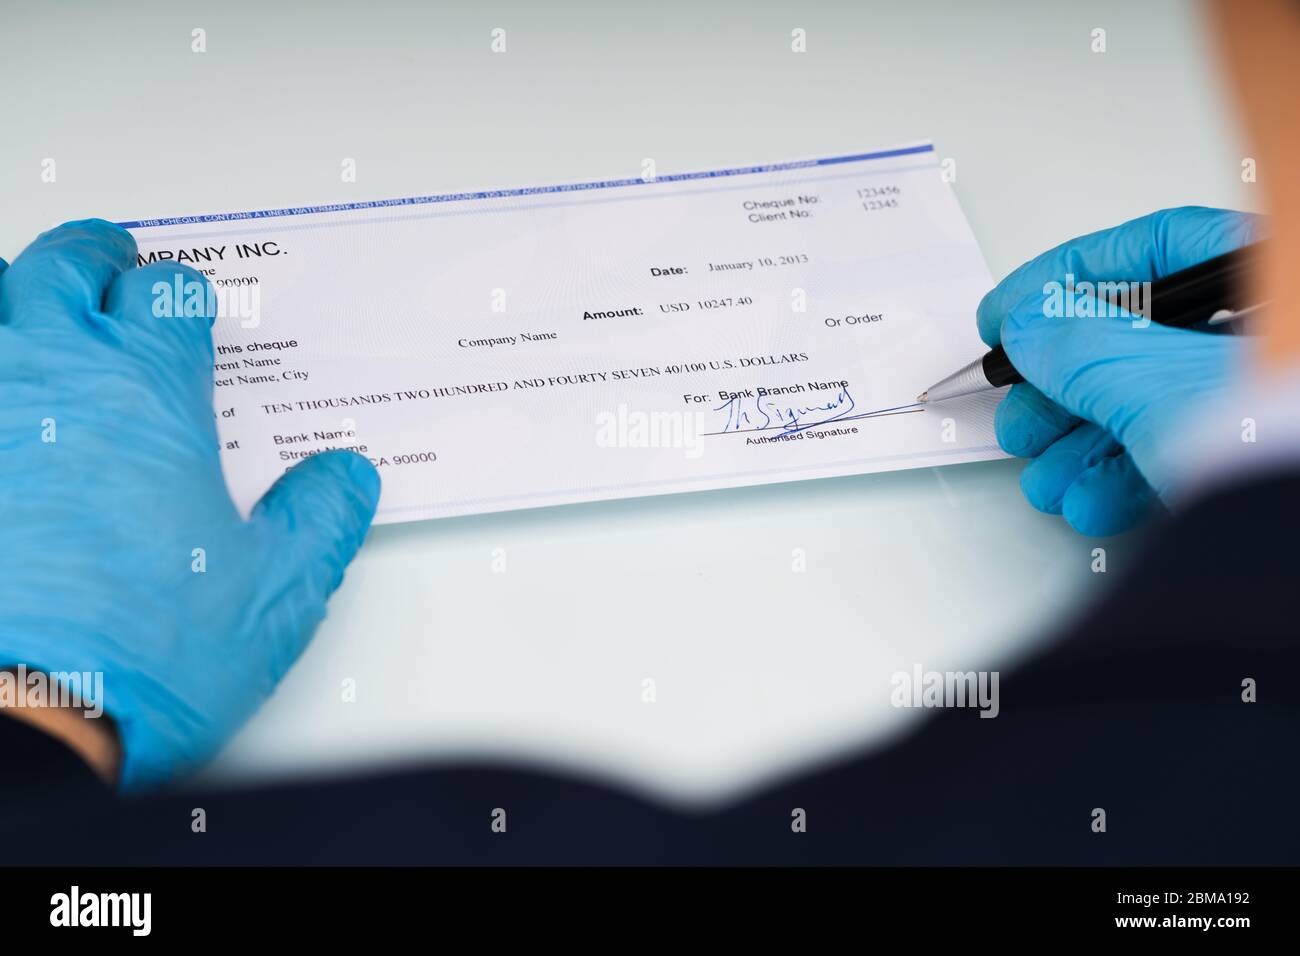 Write Cheque High Resolution Stock Photography and Images - Alamy